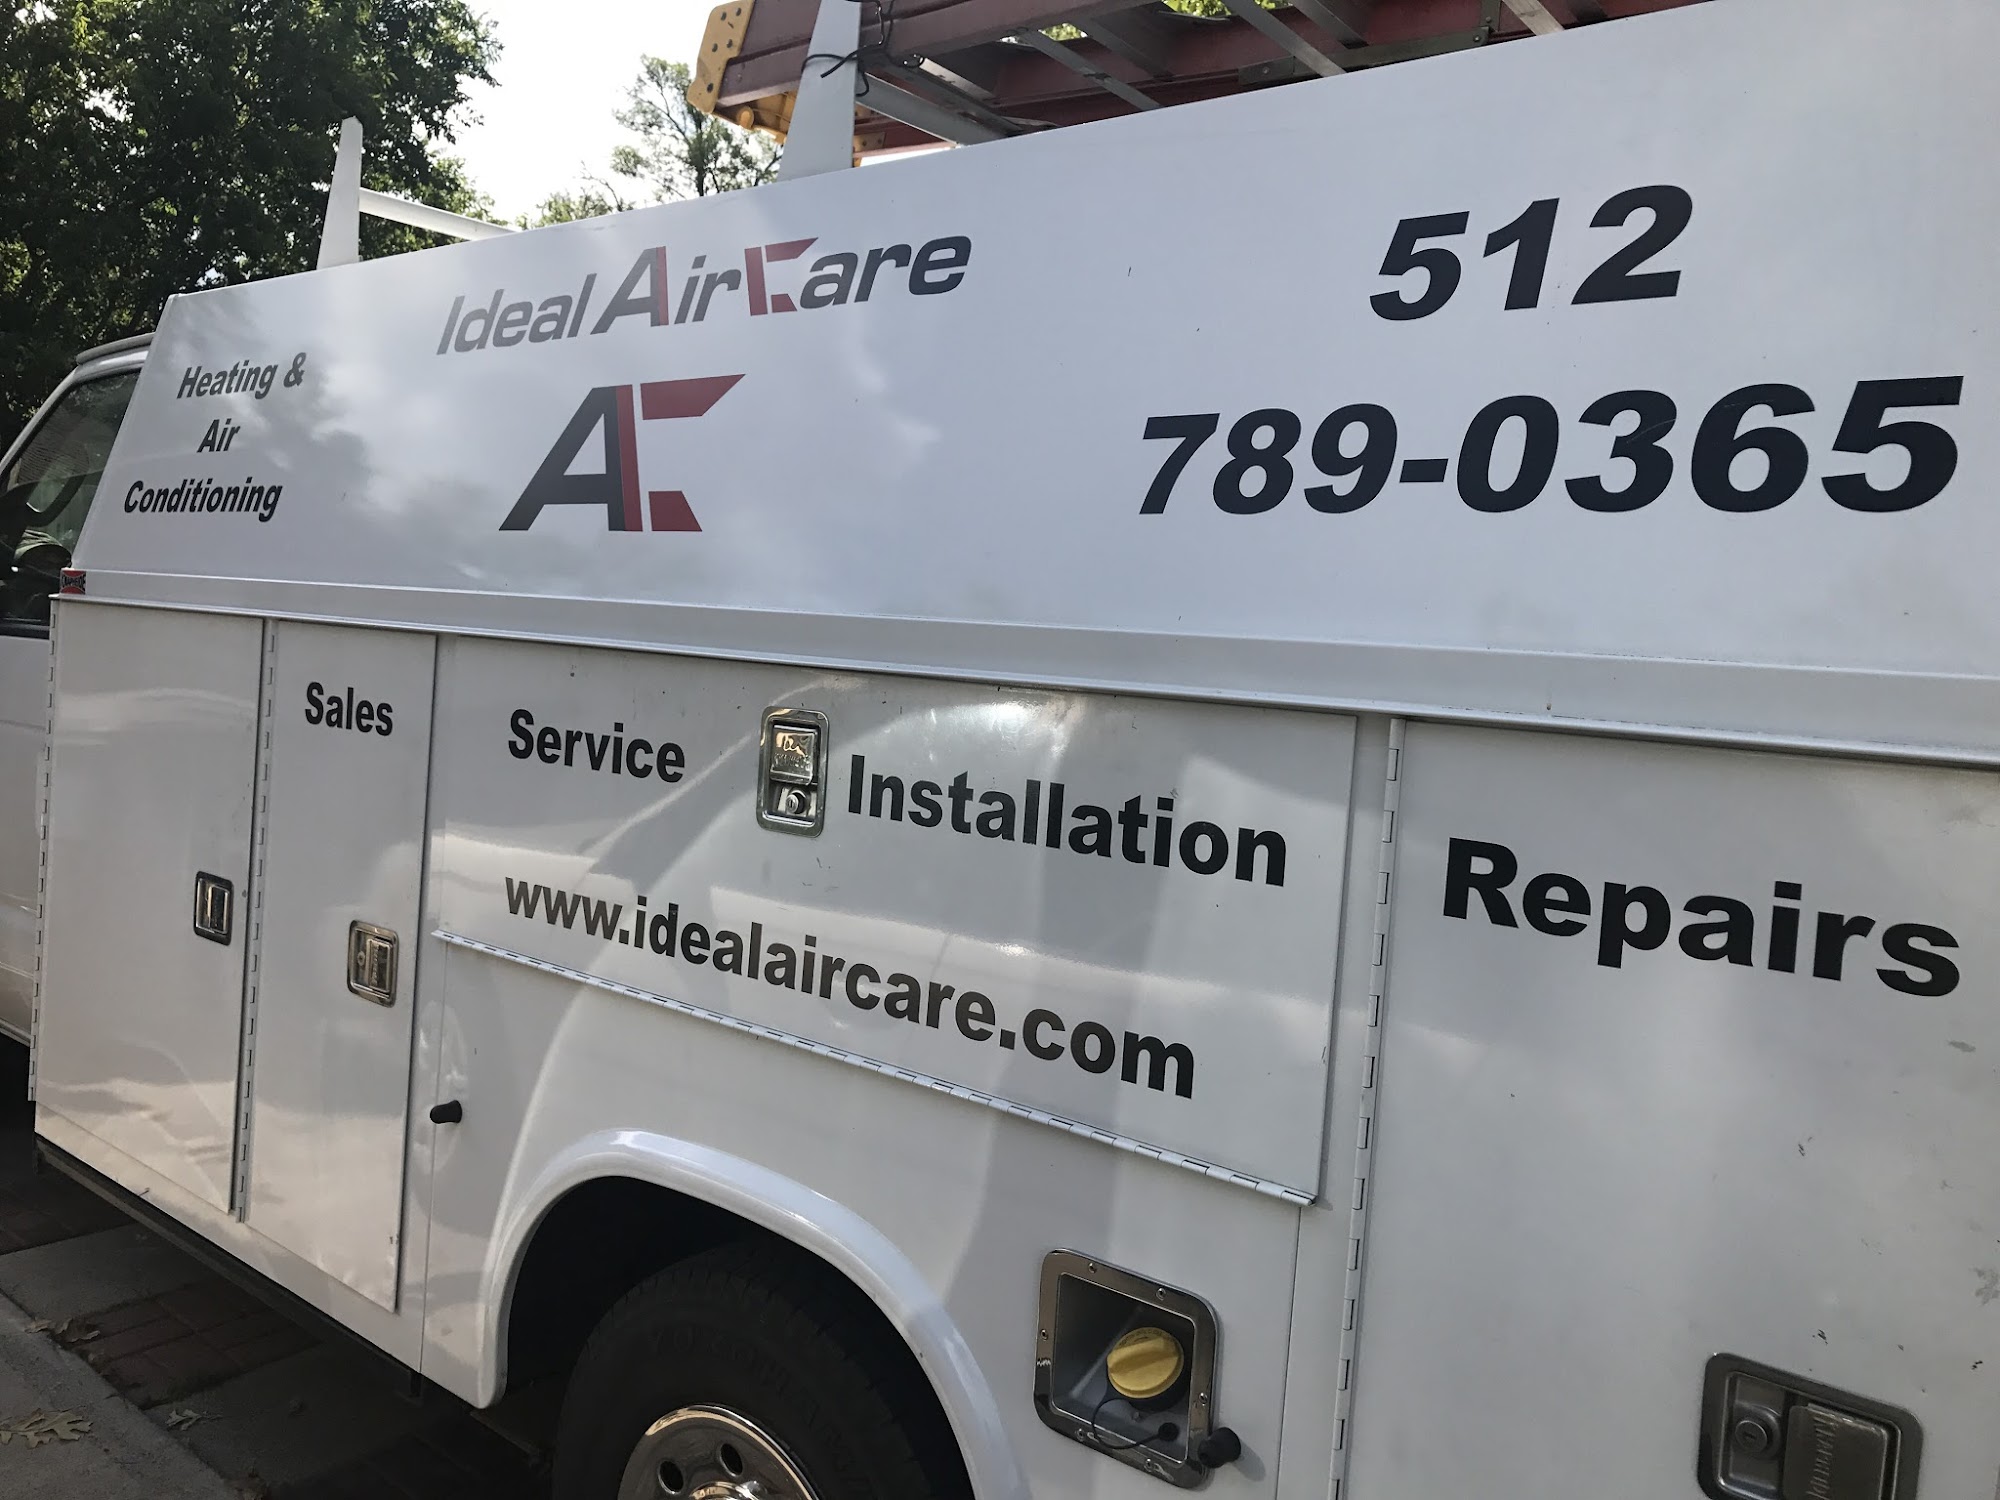 Ideal Aircare